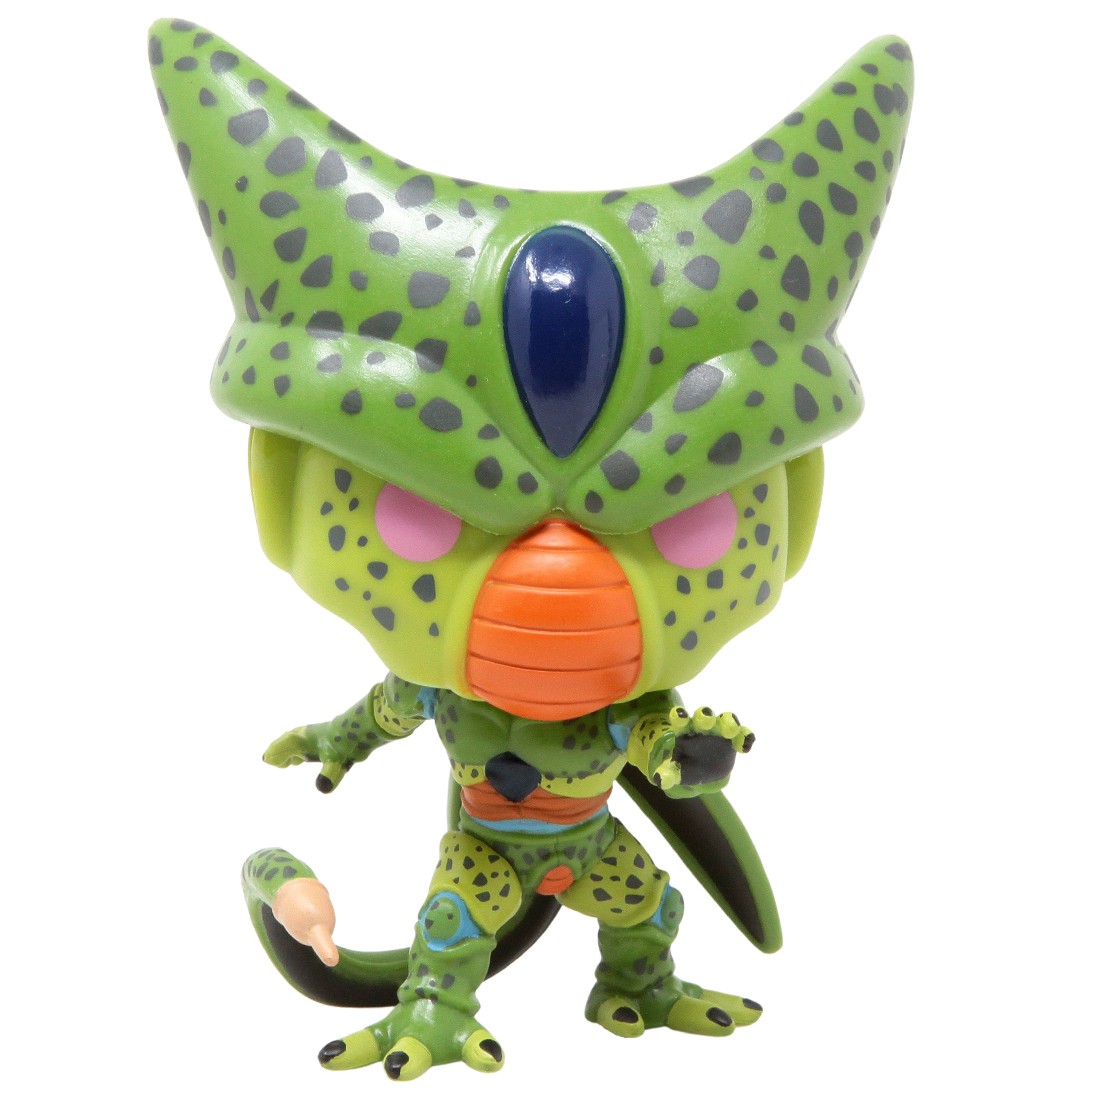 Funko POP Animation Dragon Ball Z - Cell First Form green